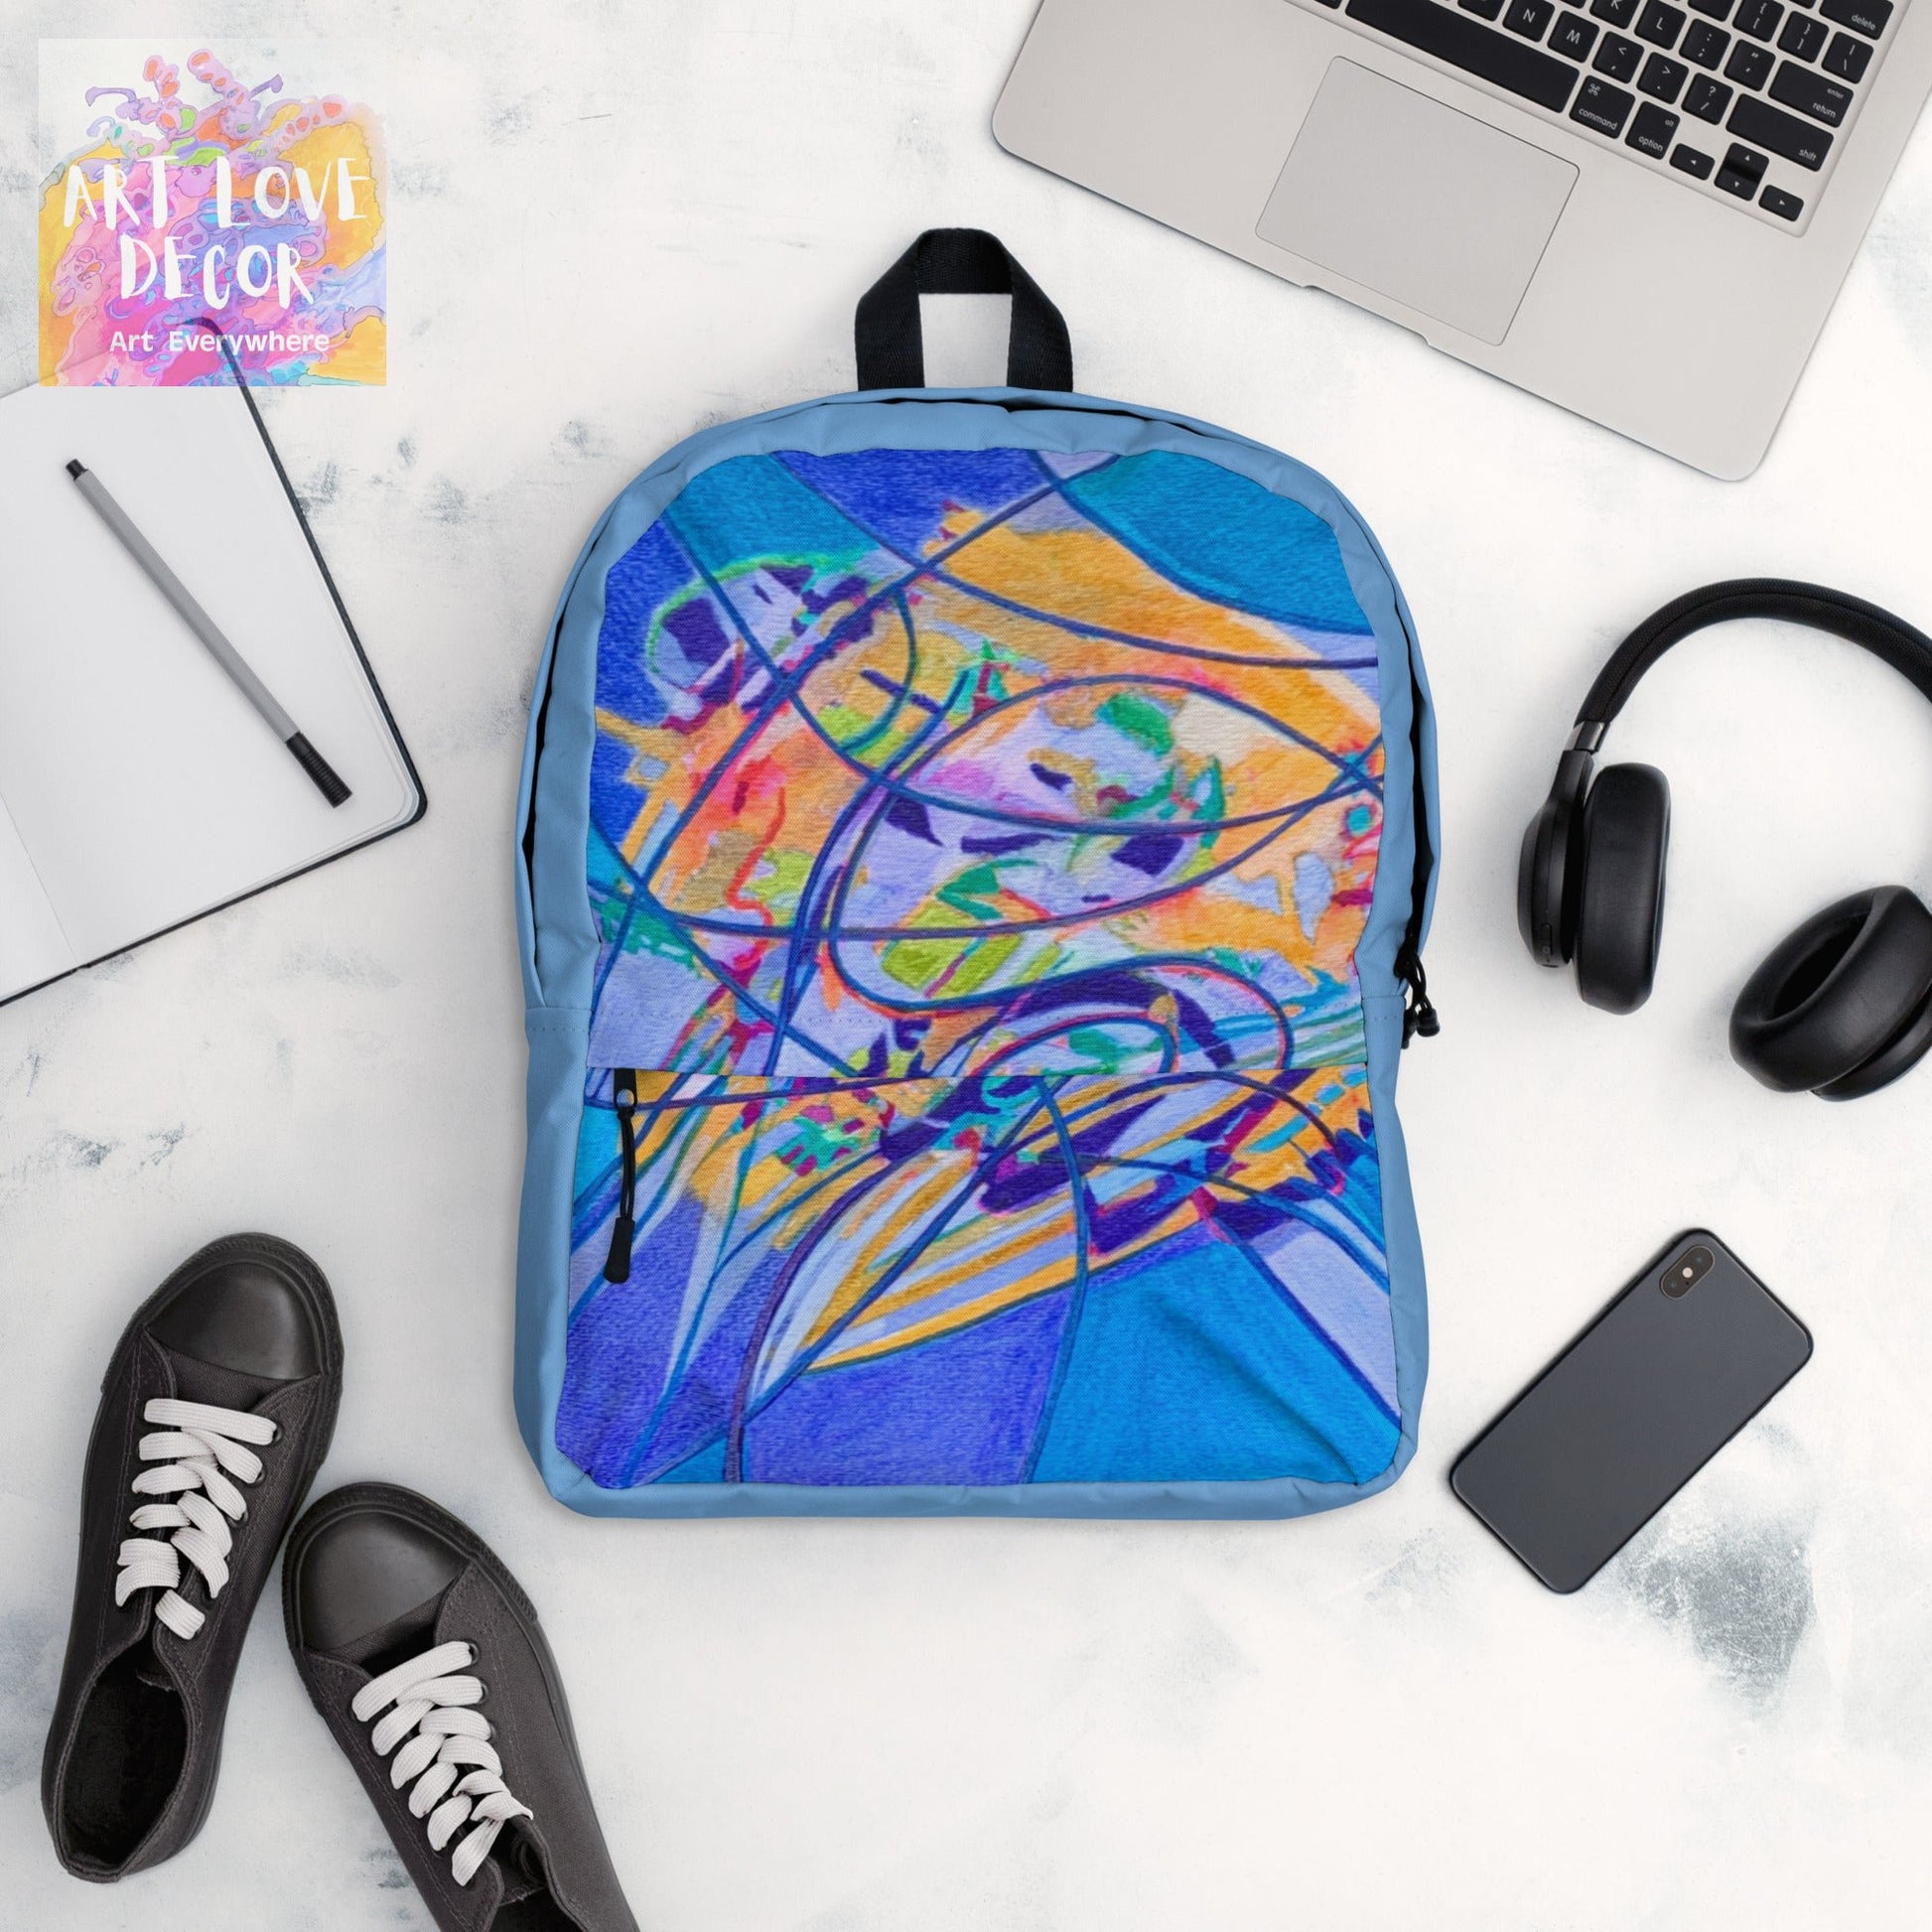 Opportunities Abstract Backpack - Art Love Decor